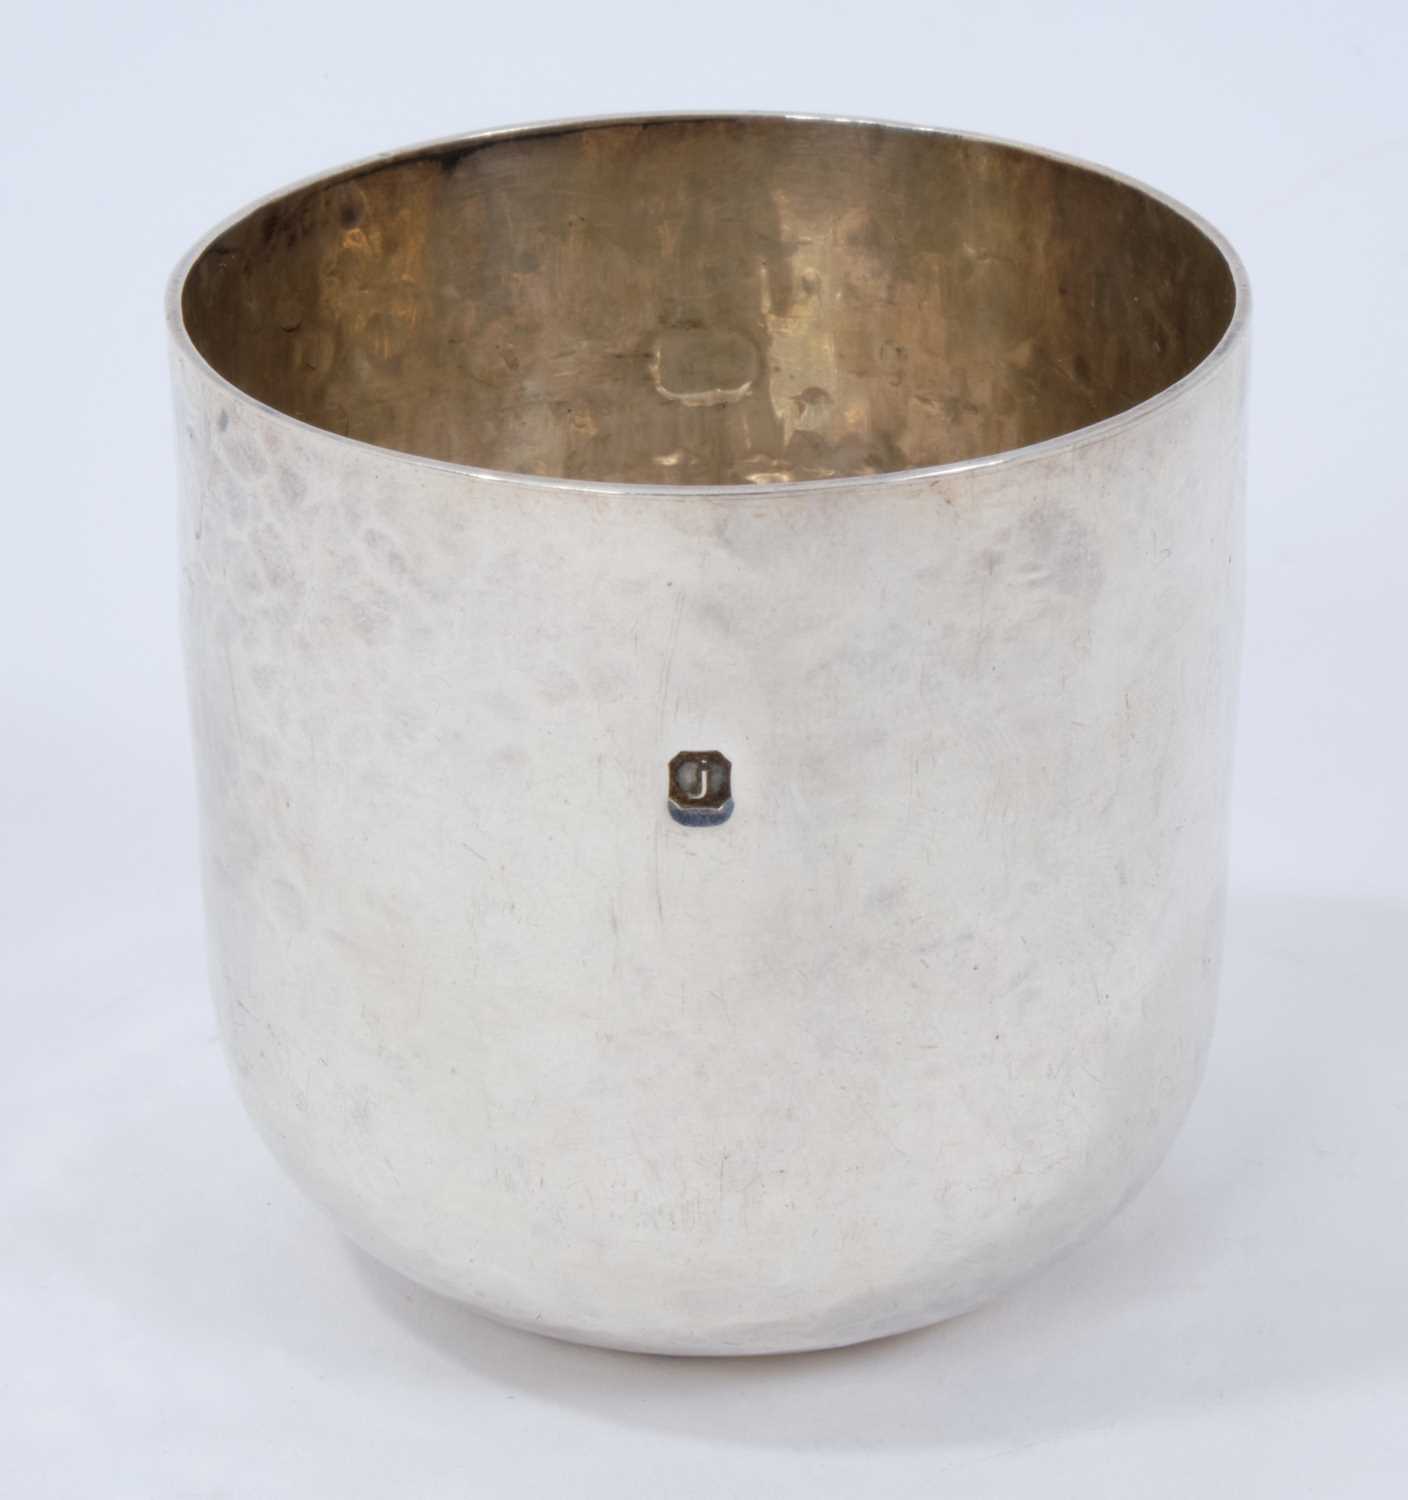 Contemporary Scottish silver tumbler cup with spot hammered finish (Edinburgh 2008).